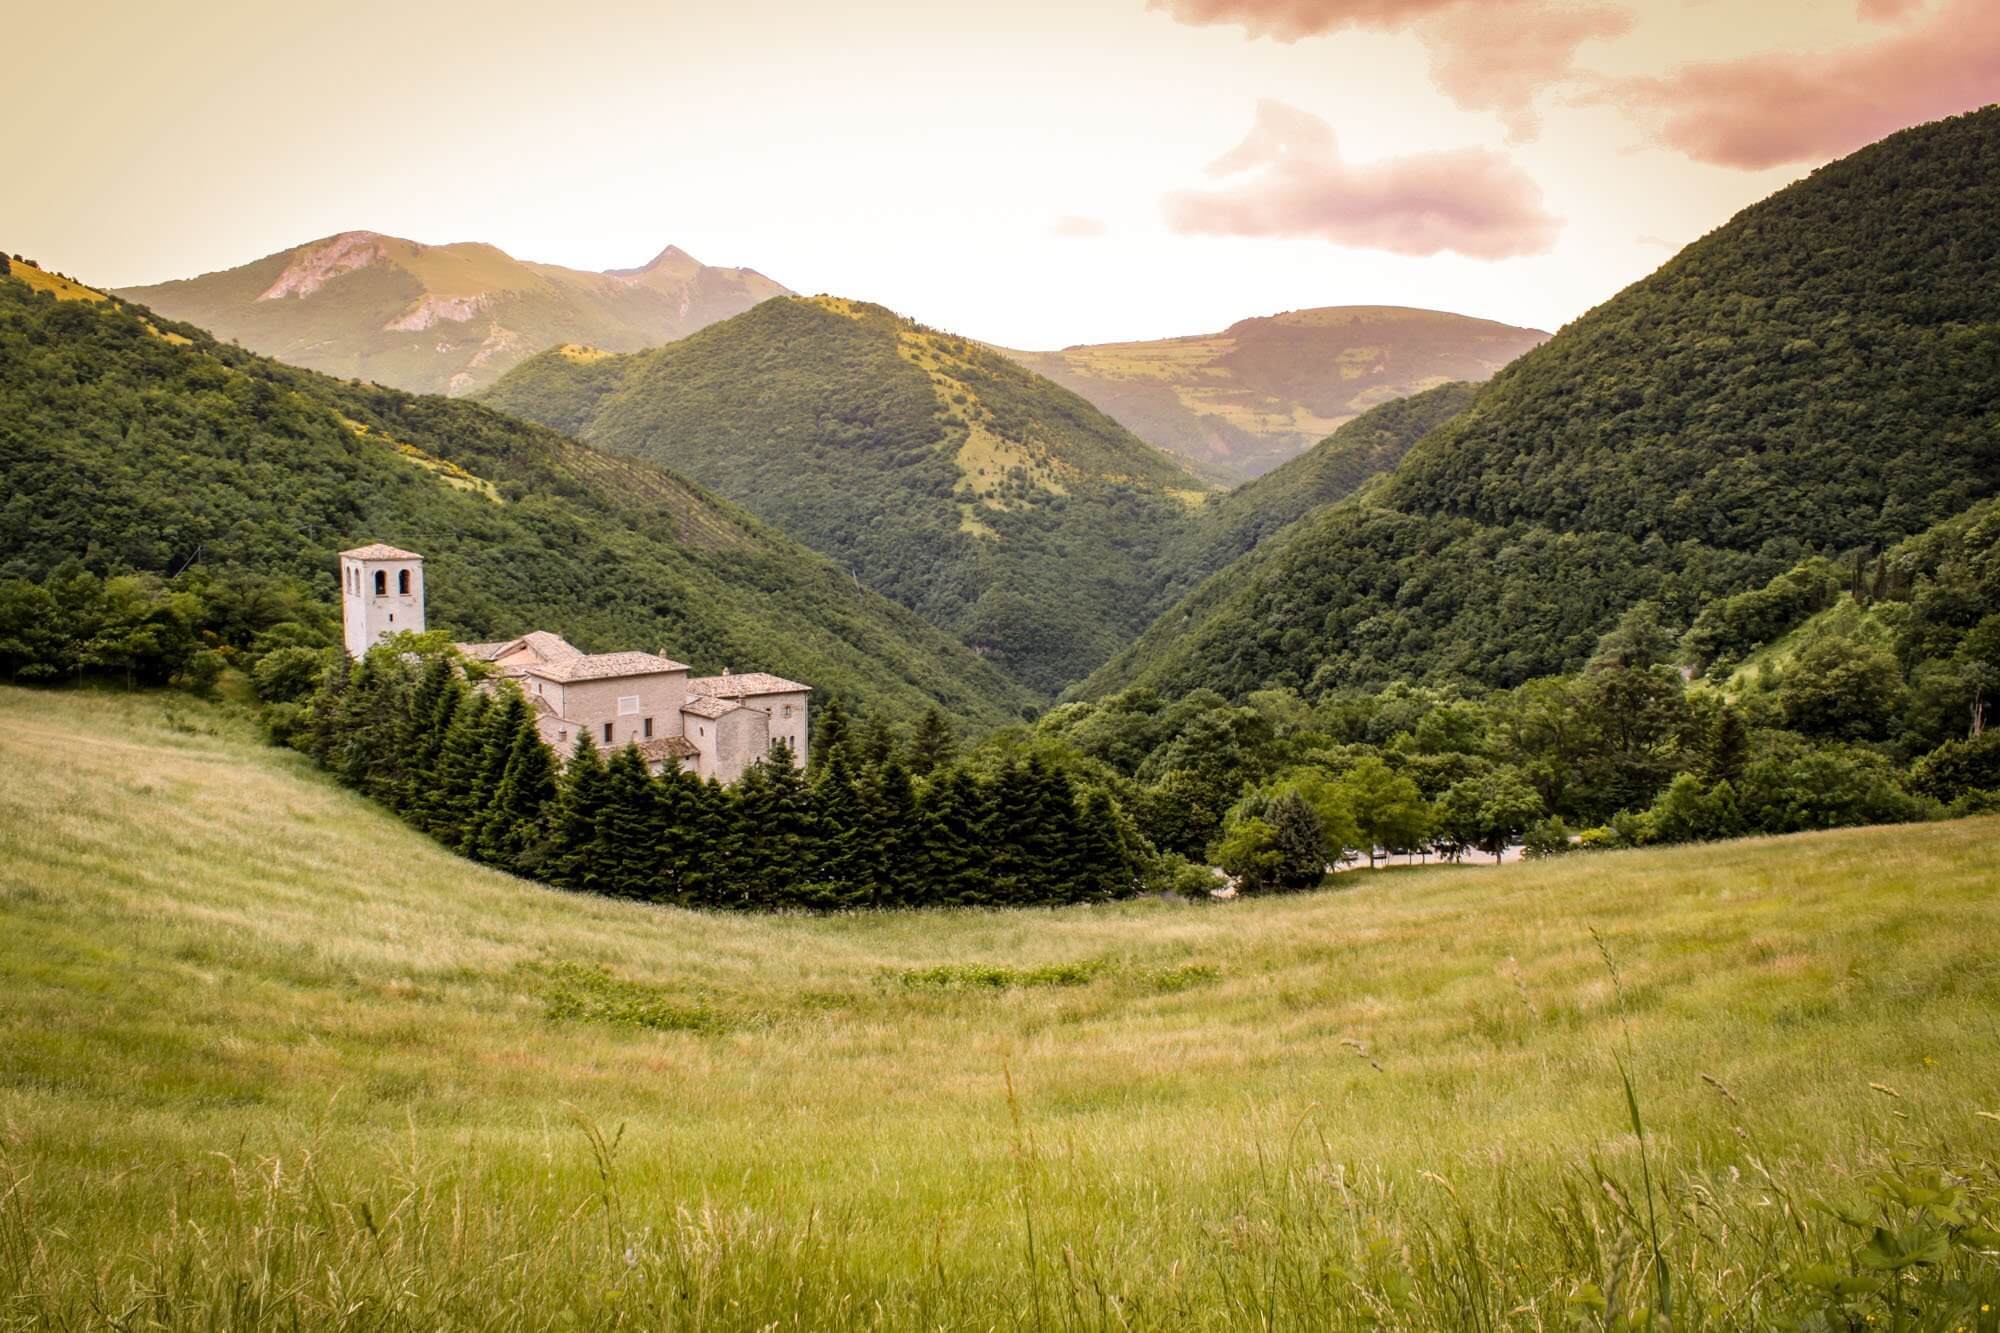 The Fonte Avellana Monastery nestled between the hills in Le Marche, Italy